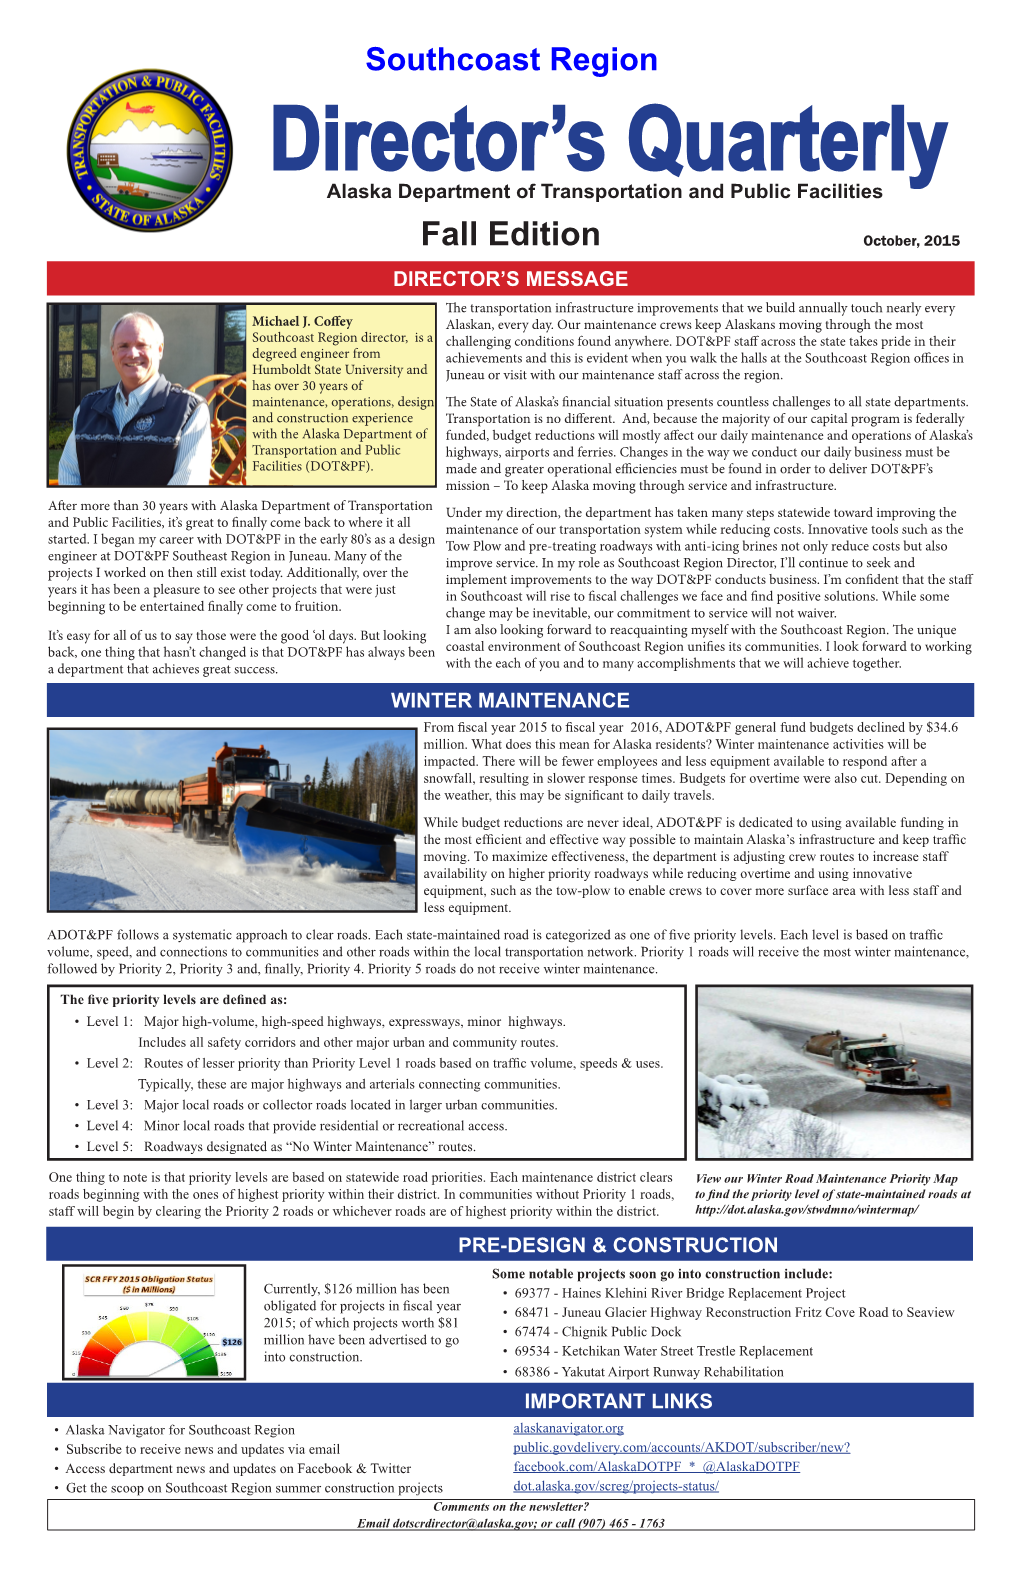 Fall Edition October, 2015 DIRECTOR’S MESSAGE the Transportation Infrastructure Improvements That We Build Annually Touch Nearly Every Michael J